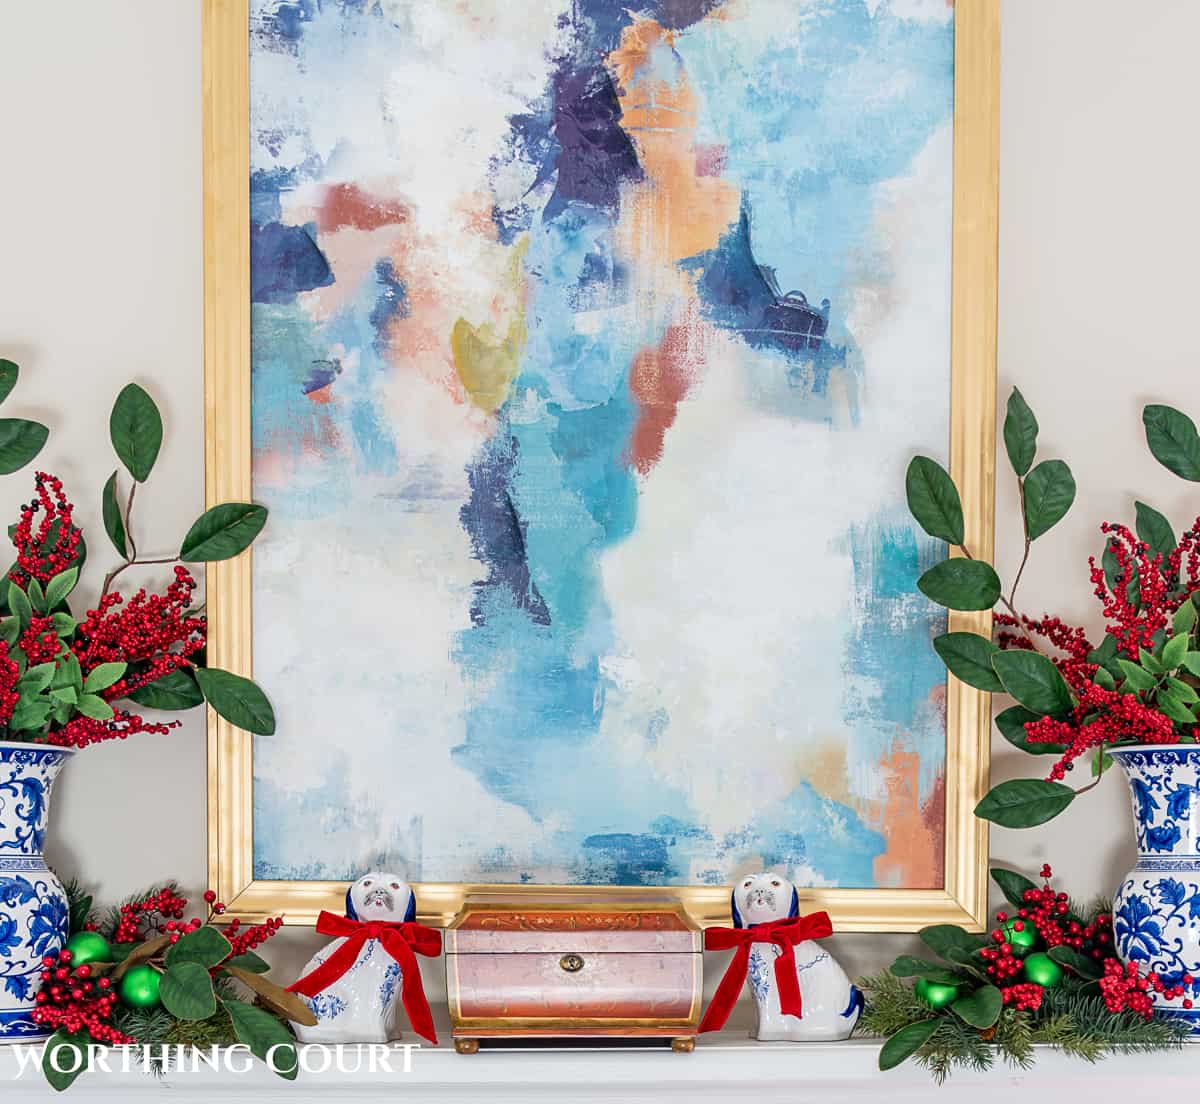 fireplace mantel with abstract art above and traditional Christmas decorations mixed with chinoiserie decor items